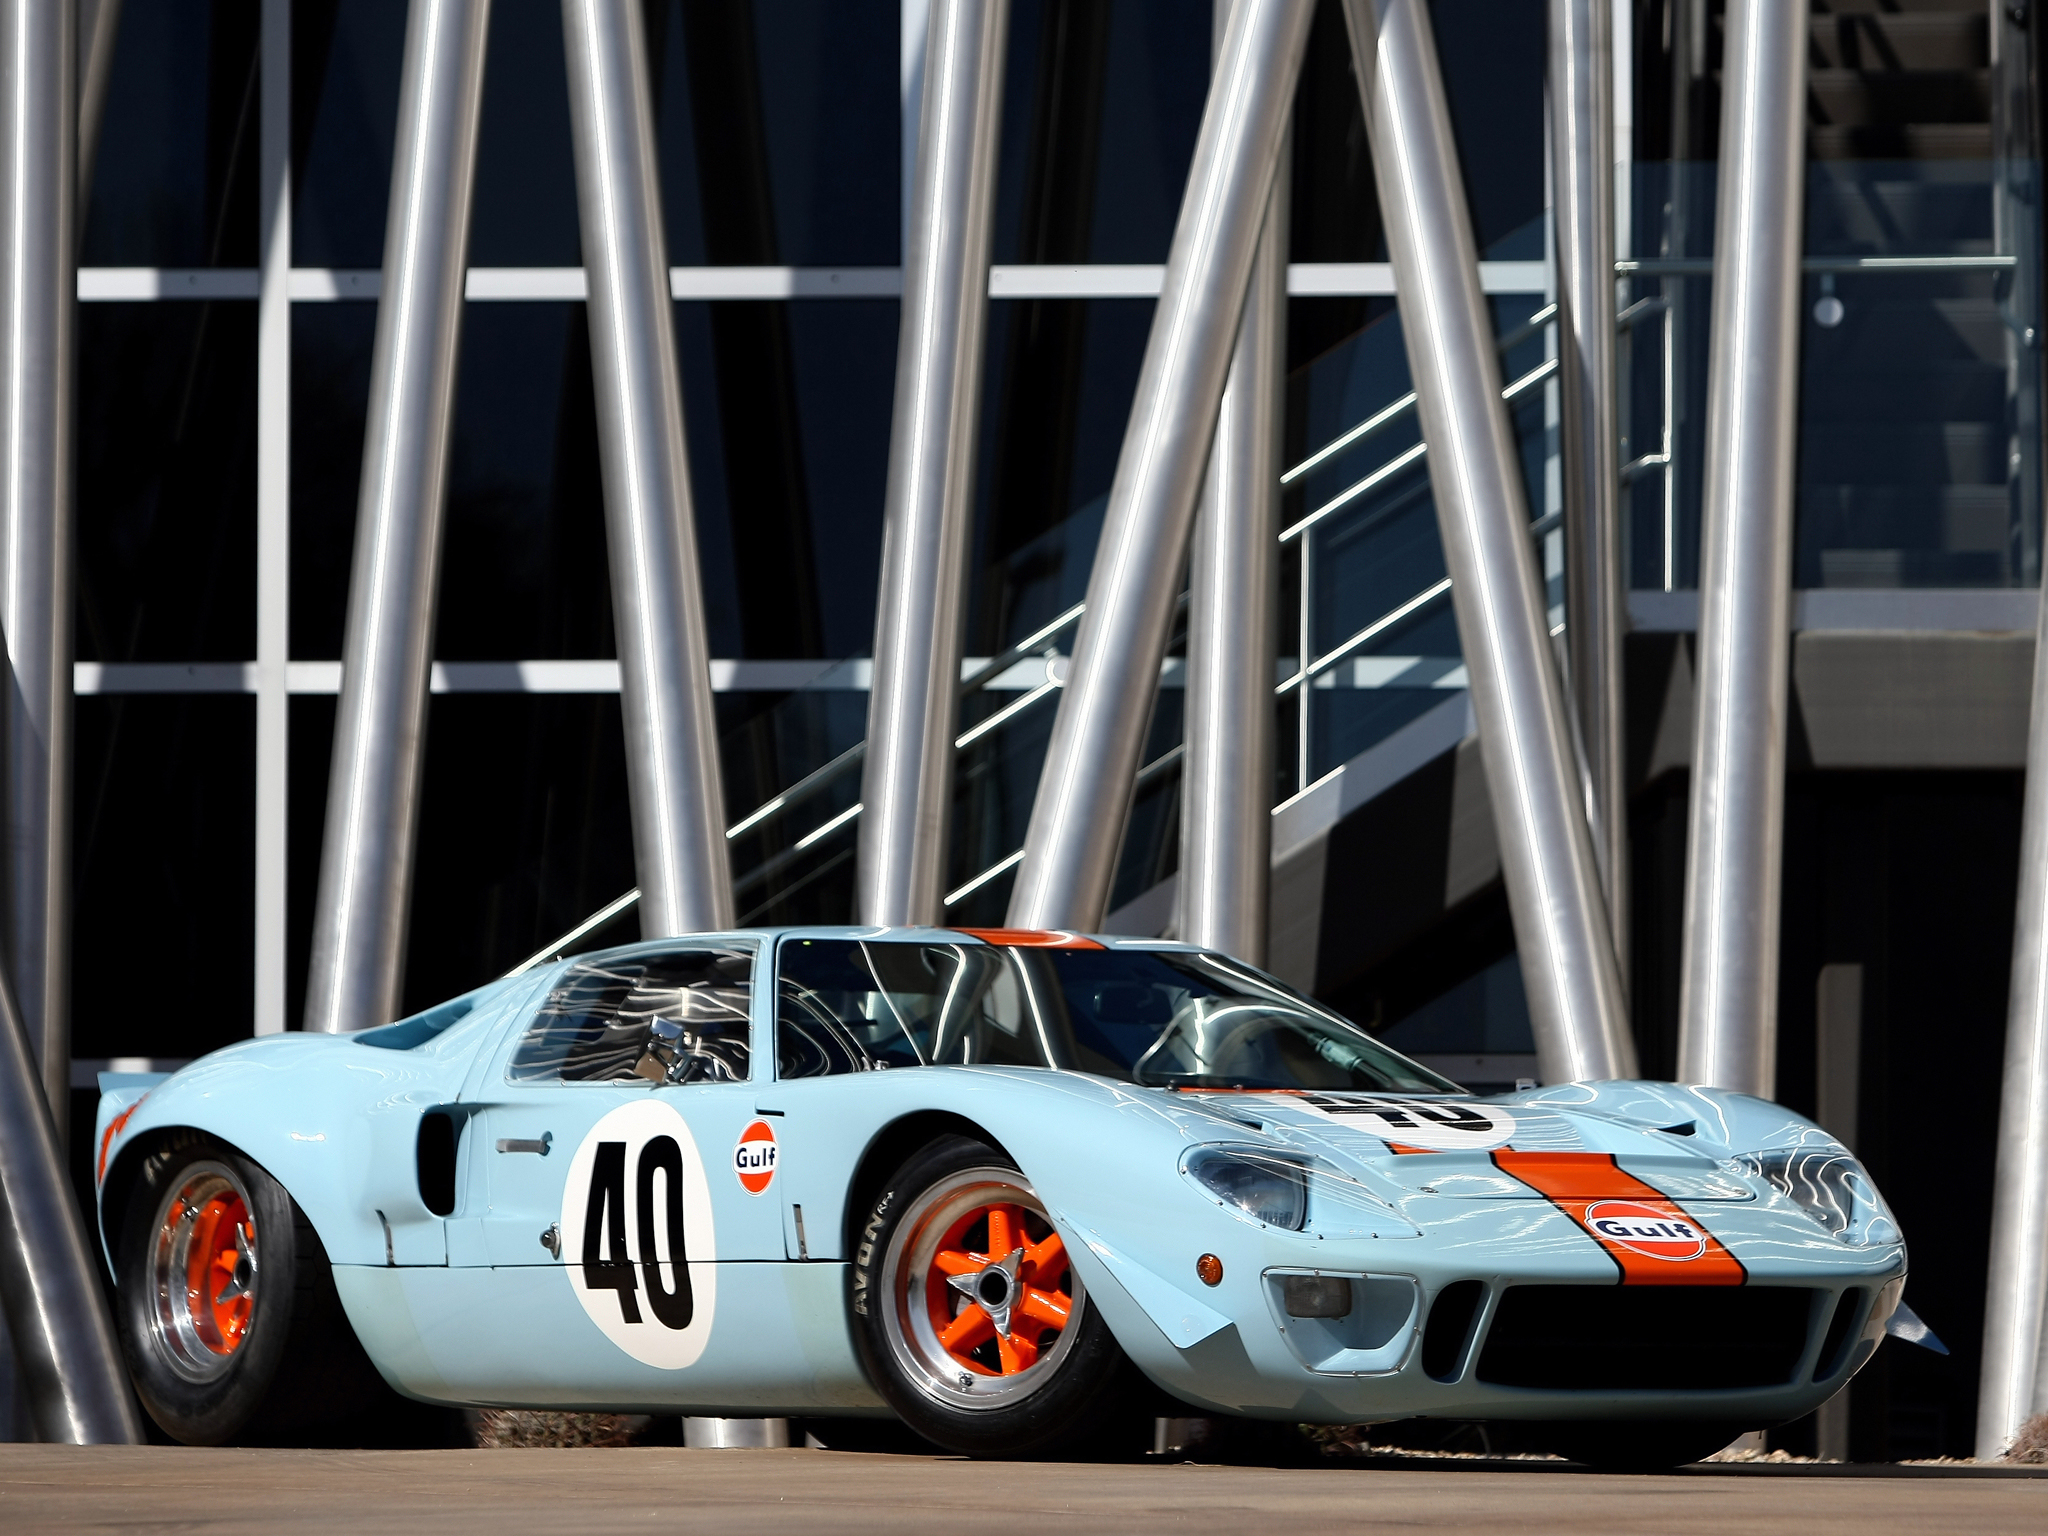 1968, Ford, Gt40, Gulf oil, Le mans, Race, Racing, Supercar, Classic Wallpaper